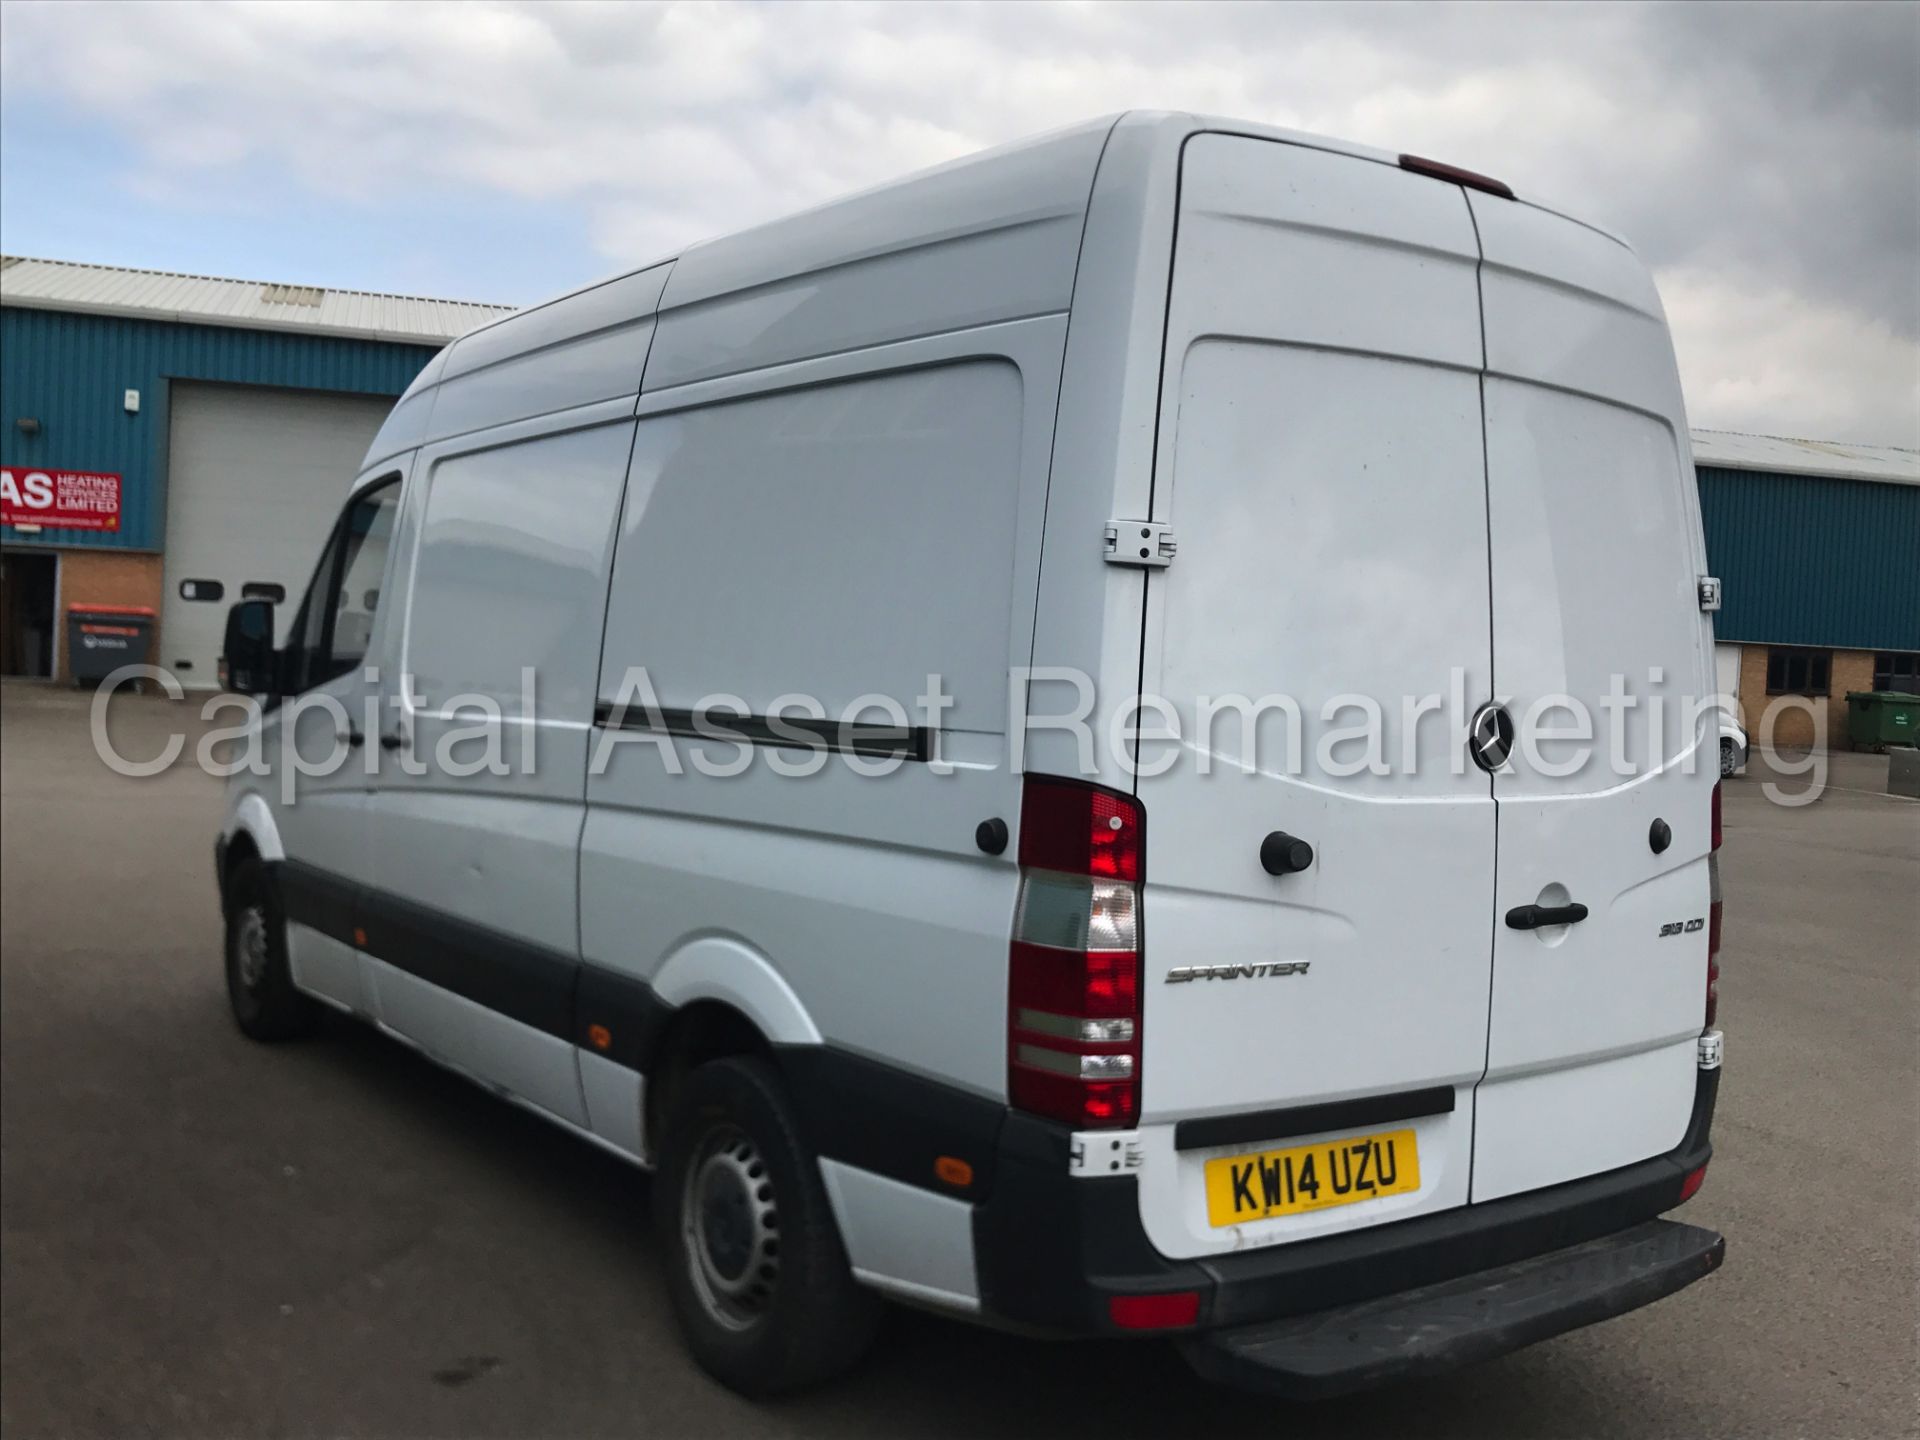 MERCEDES-BENZ SPRINTER 313 CDI 'MWB HI-ROOF' (2014) '130 BHP - 6 SPEED' (1 COMPANY OWNER FROM NEW) - Image 4 of 22